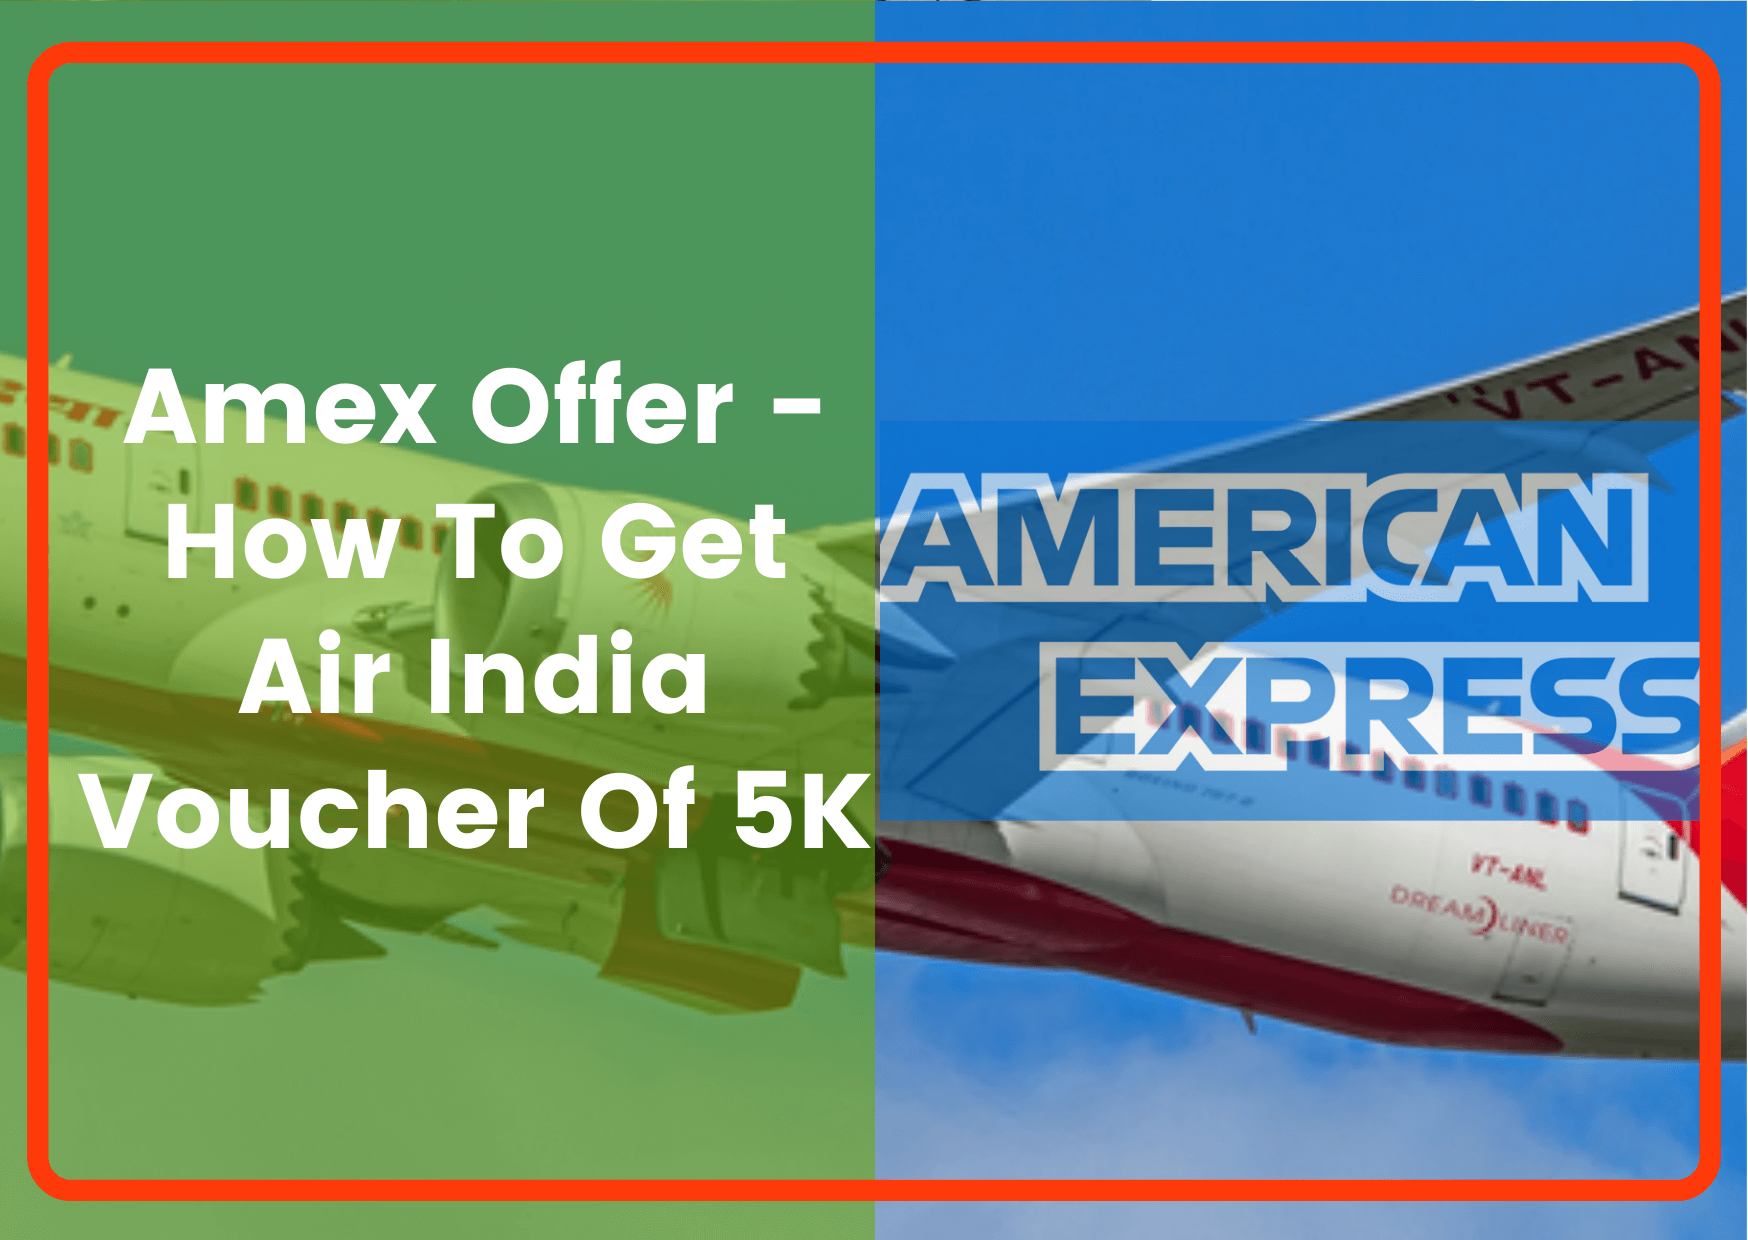 Amex Offer How to get Air India Voucher of 5K (Jan 2021) Save More Money